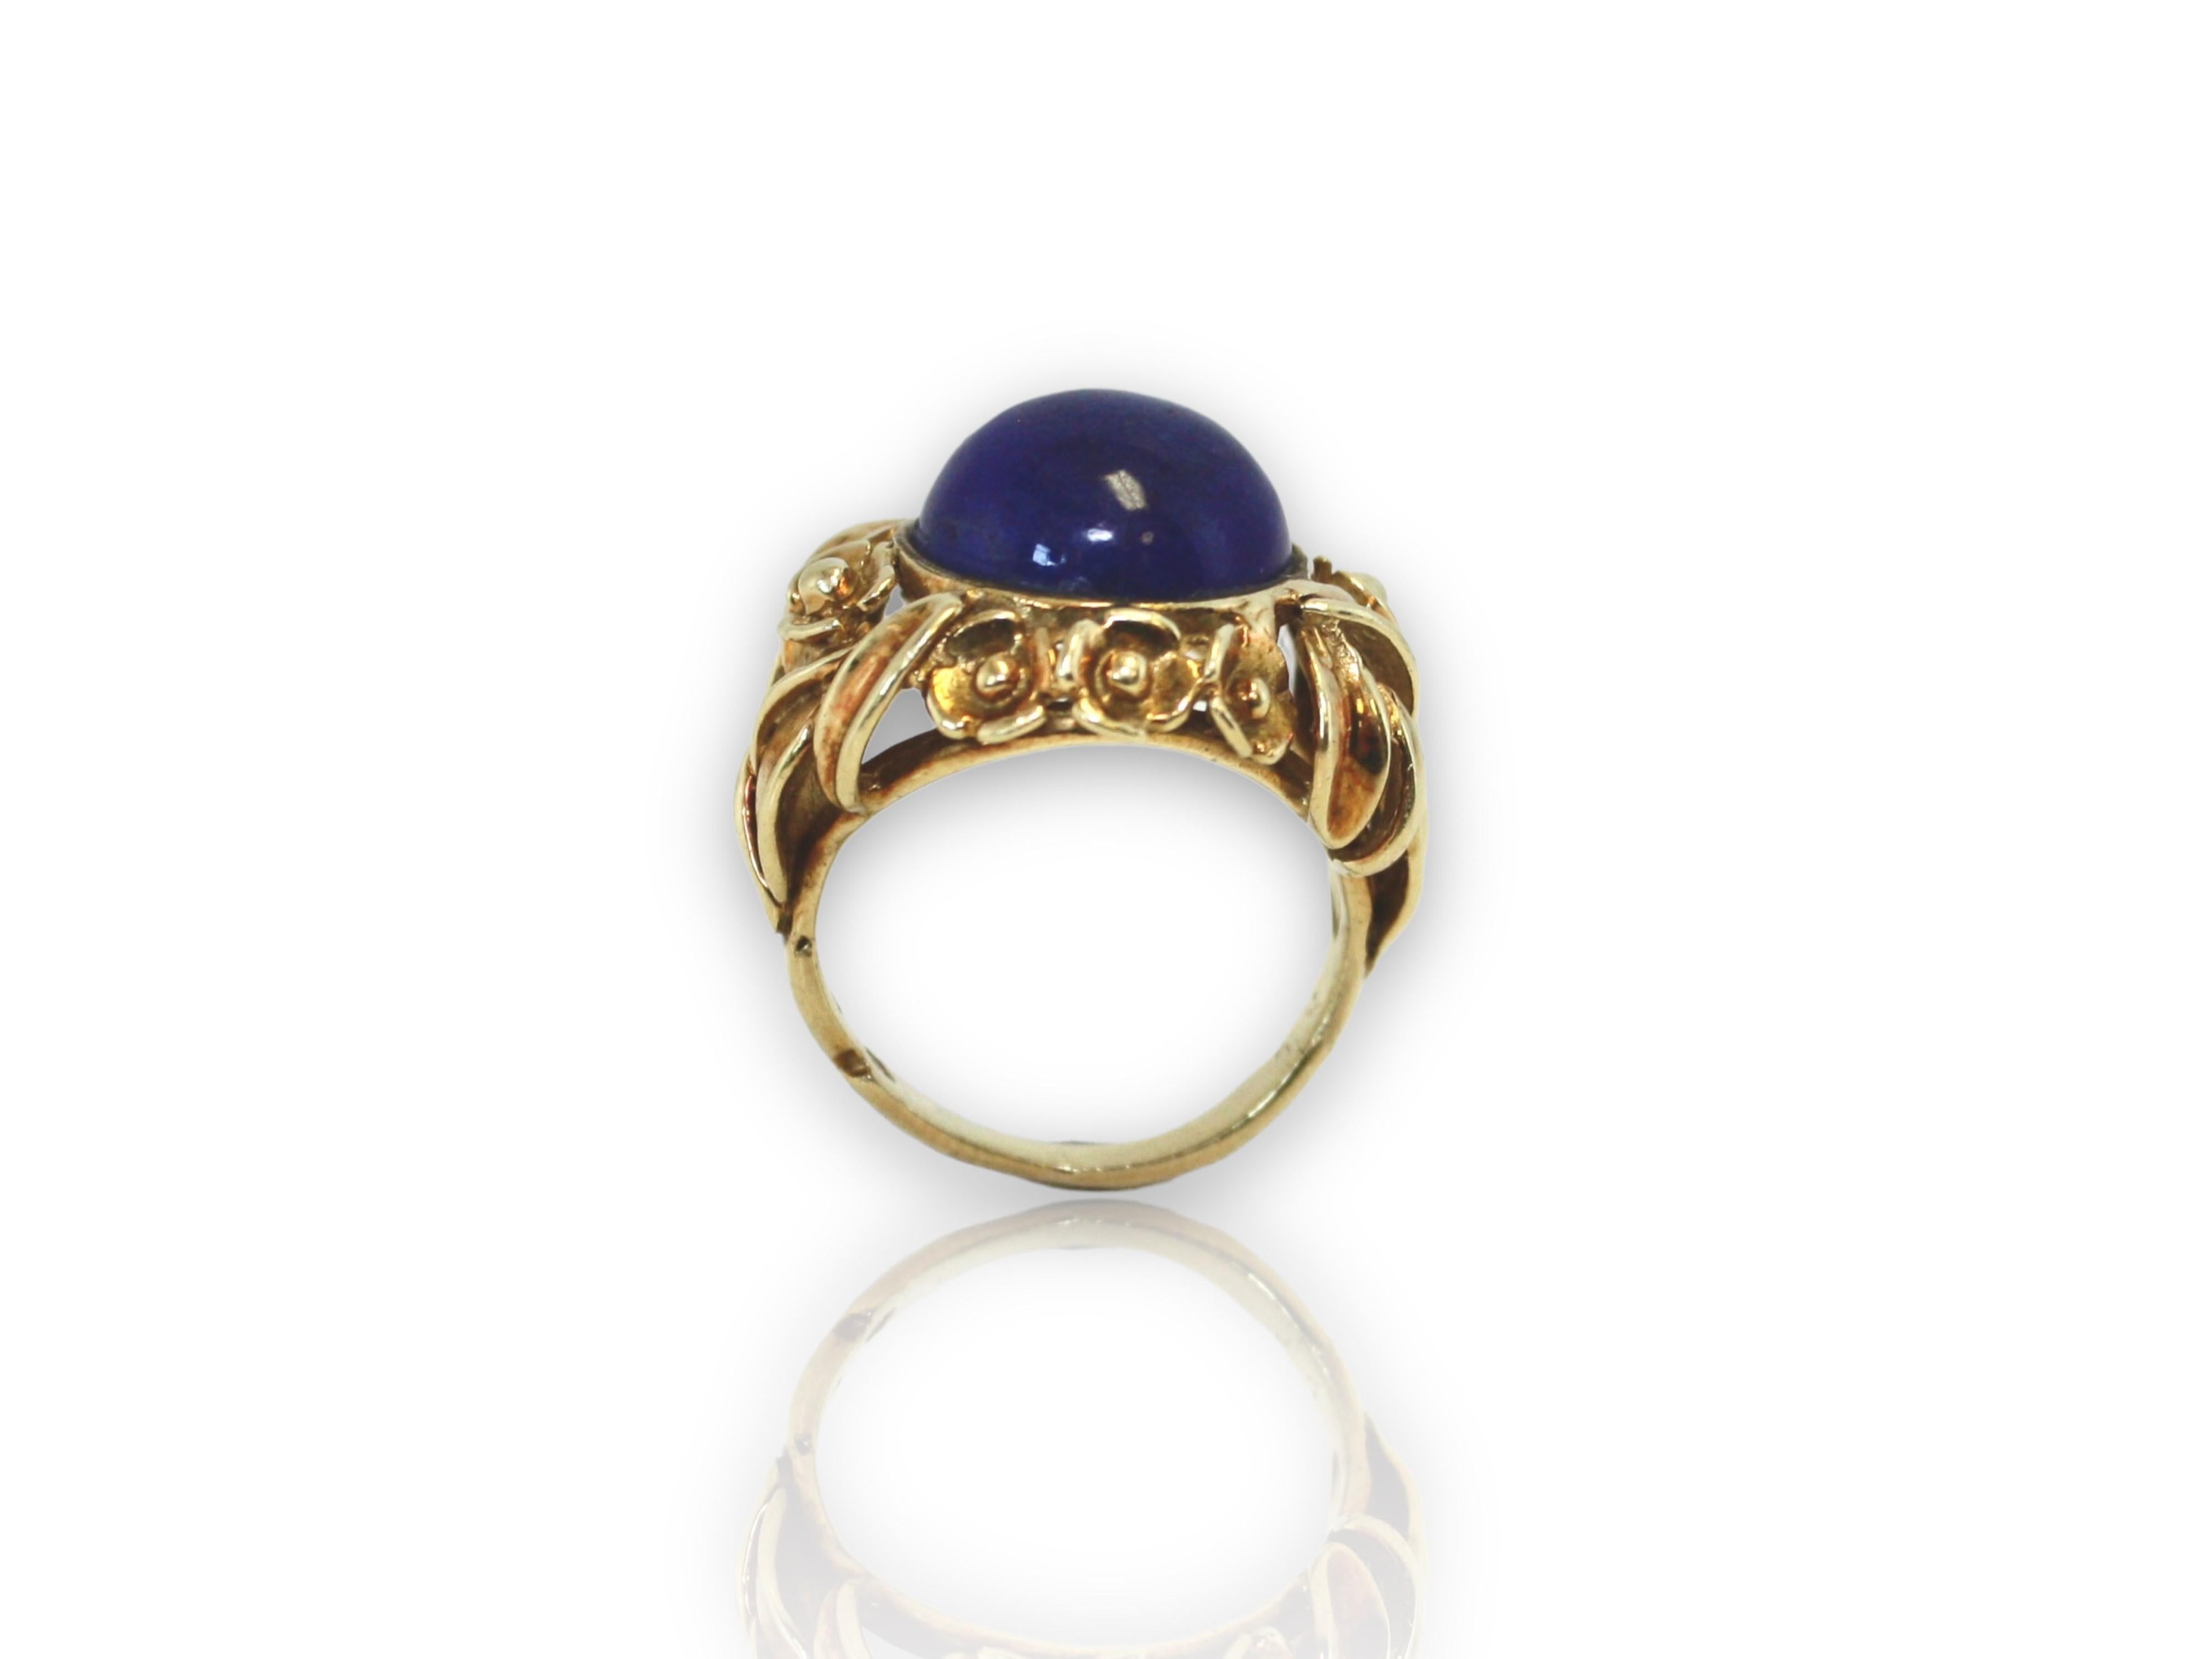 Lapis Luzila Cocktail Ring
18K Yellow Gold
Stamped 750
12mm Cabochon Cut